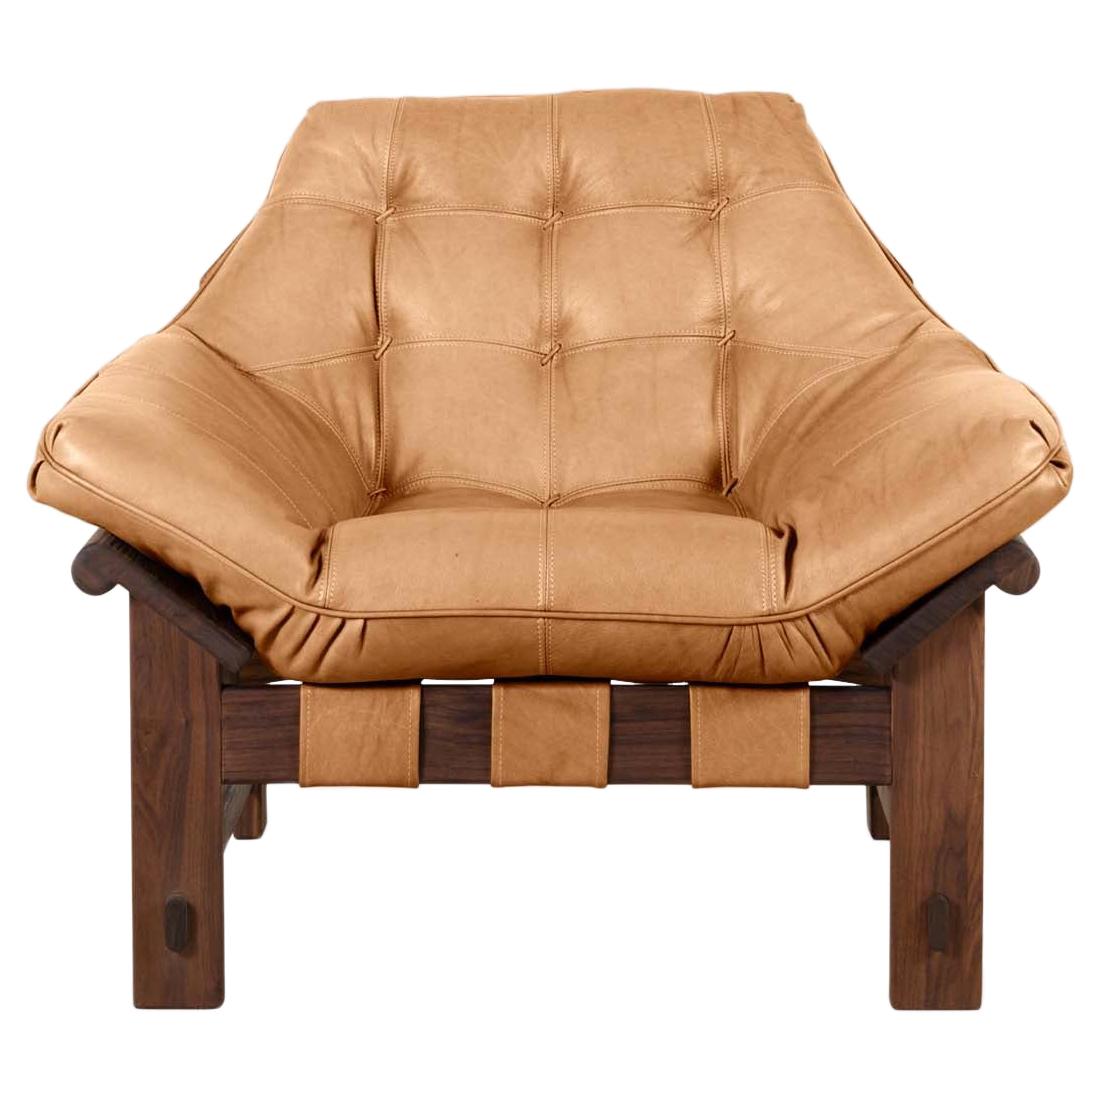 Oiled Walnut and Tan Leather Ojai Lounge Chair by Lawson-Fenning